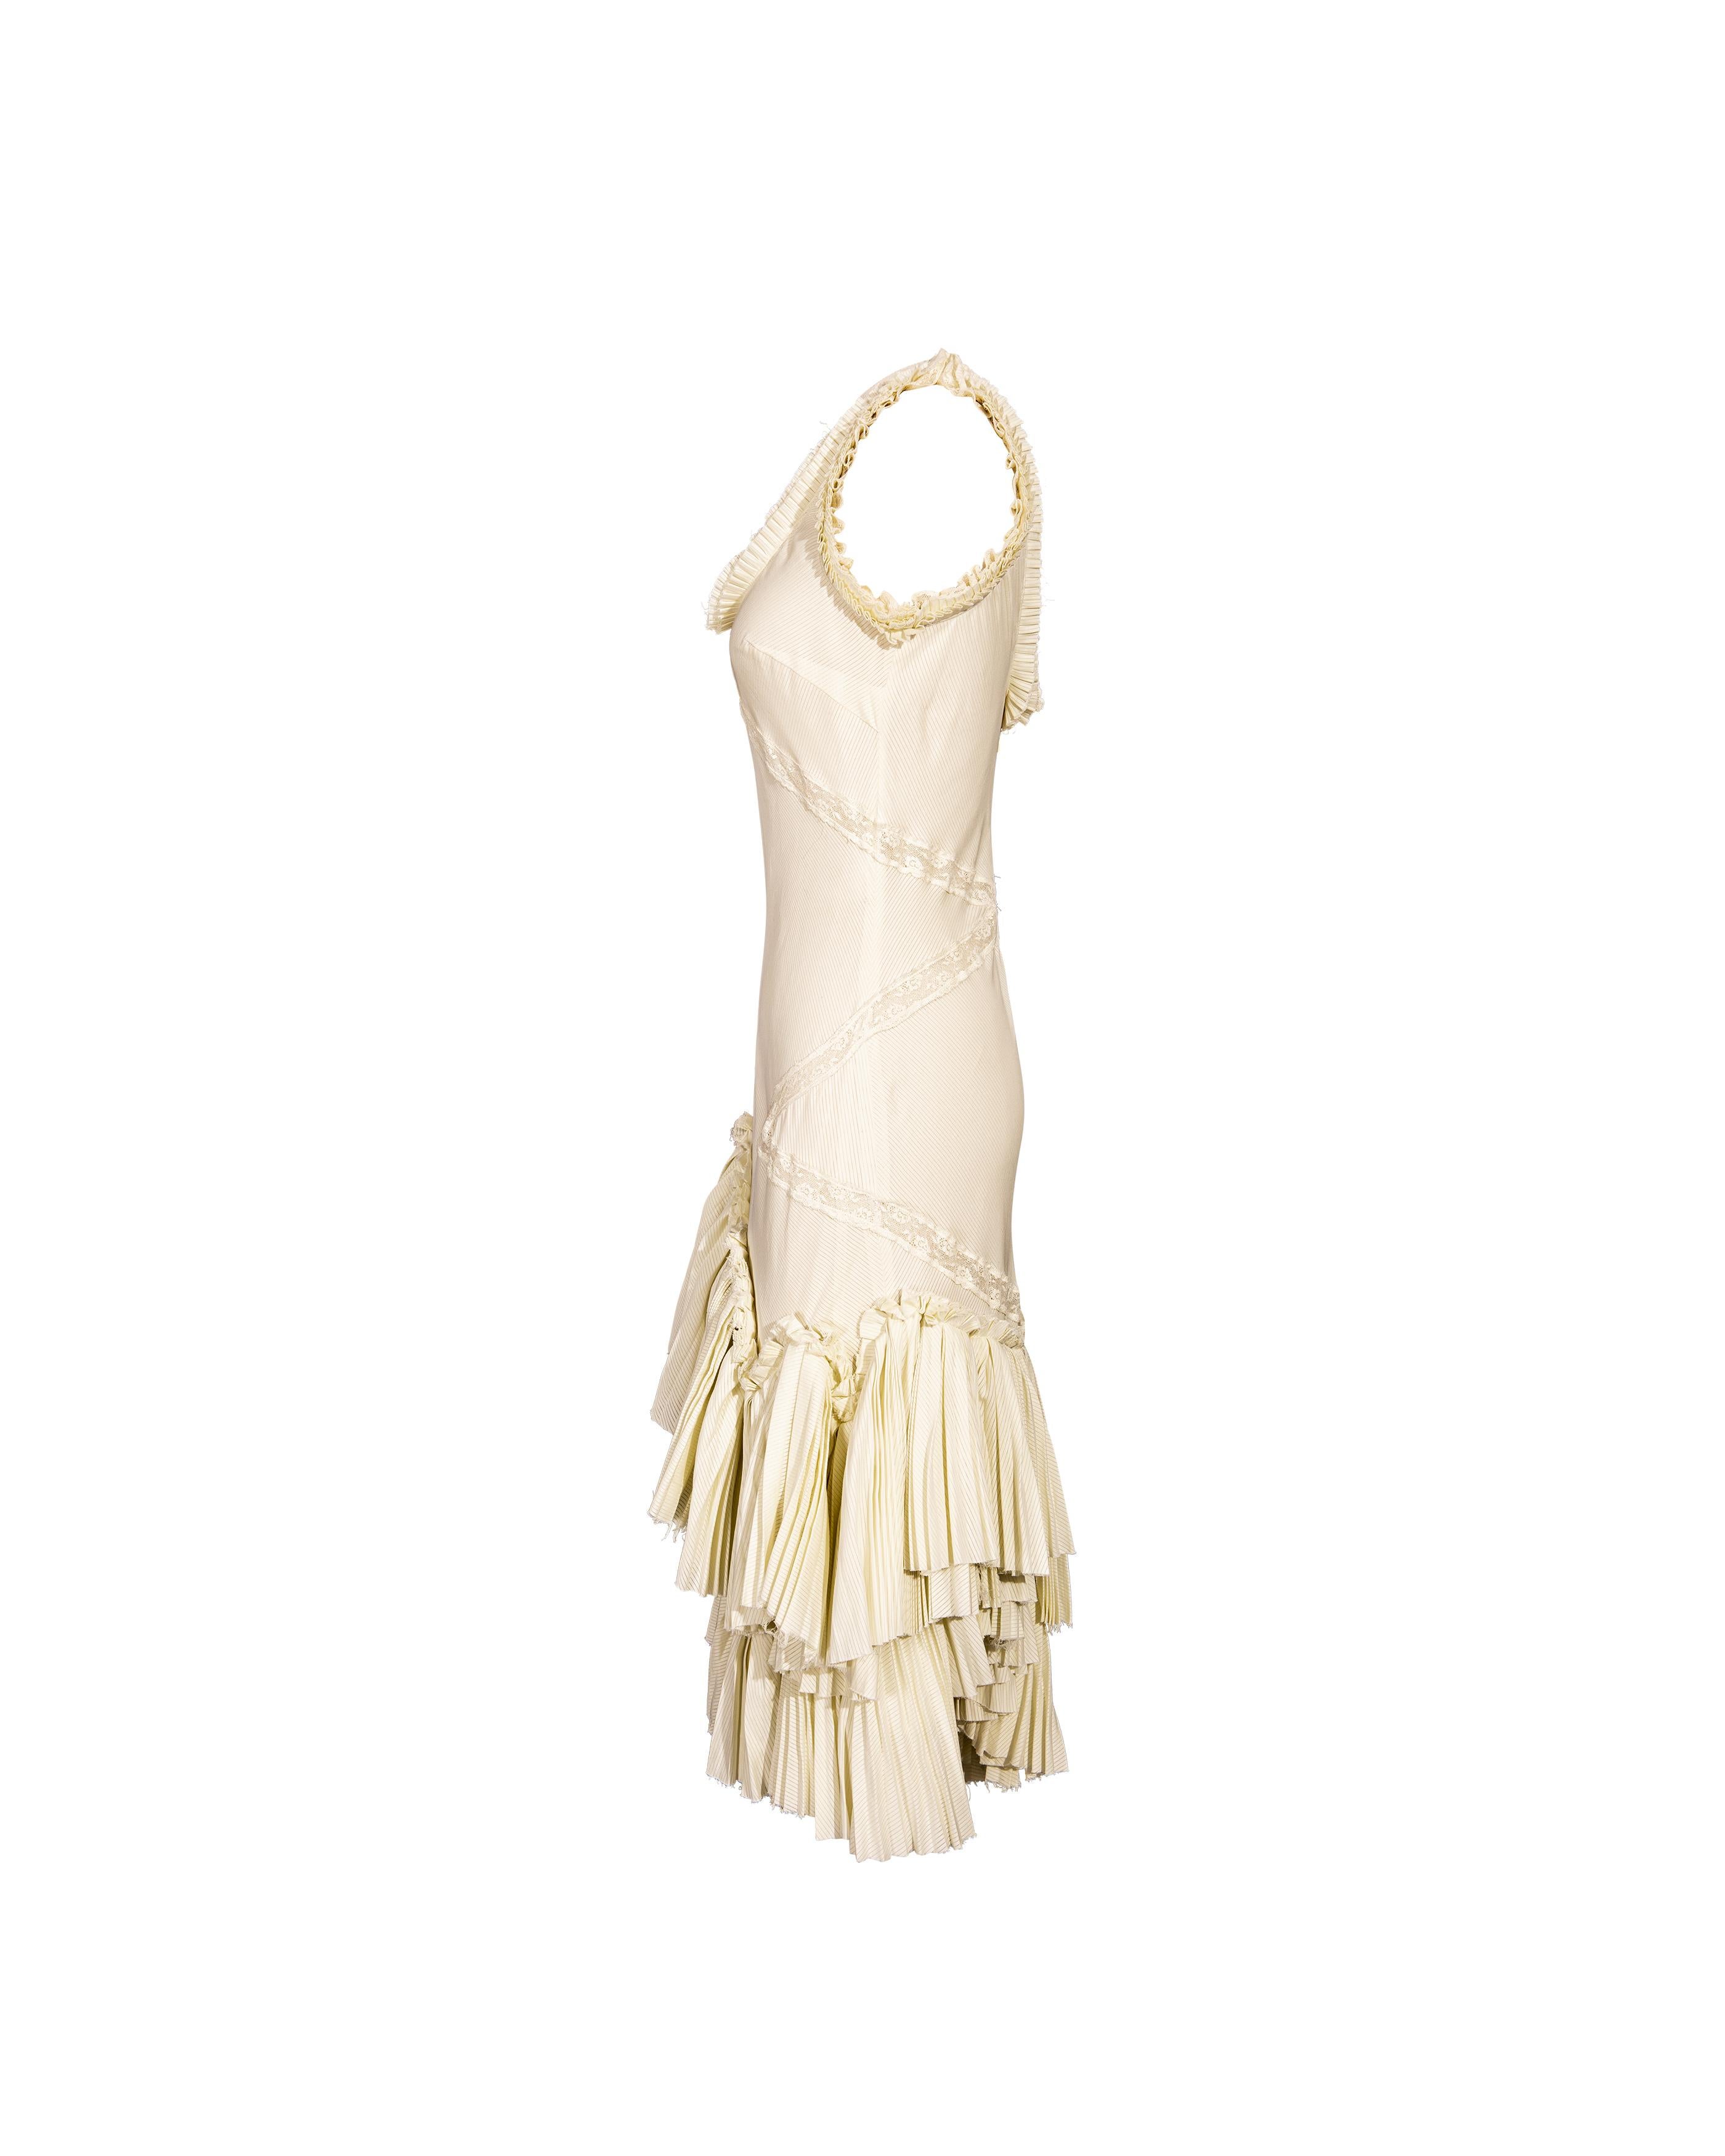 Women's or Men's S/S 2005 Alexander McQueen (Lifetime) Pale Yellow Pleated and Lace Cotton Dress For Sale